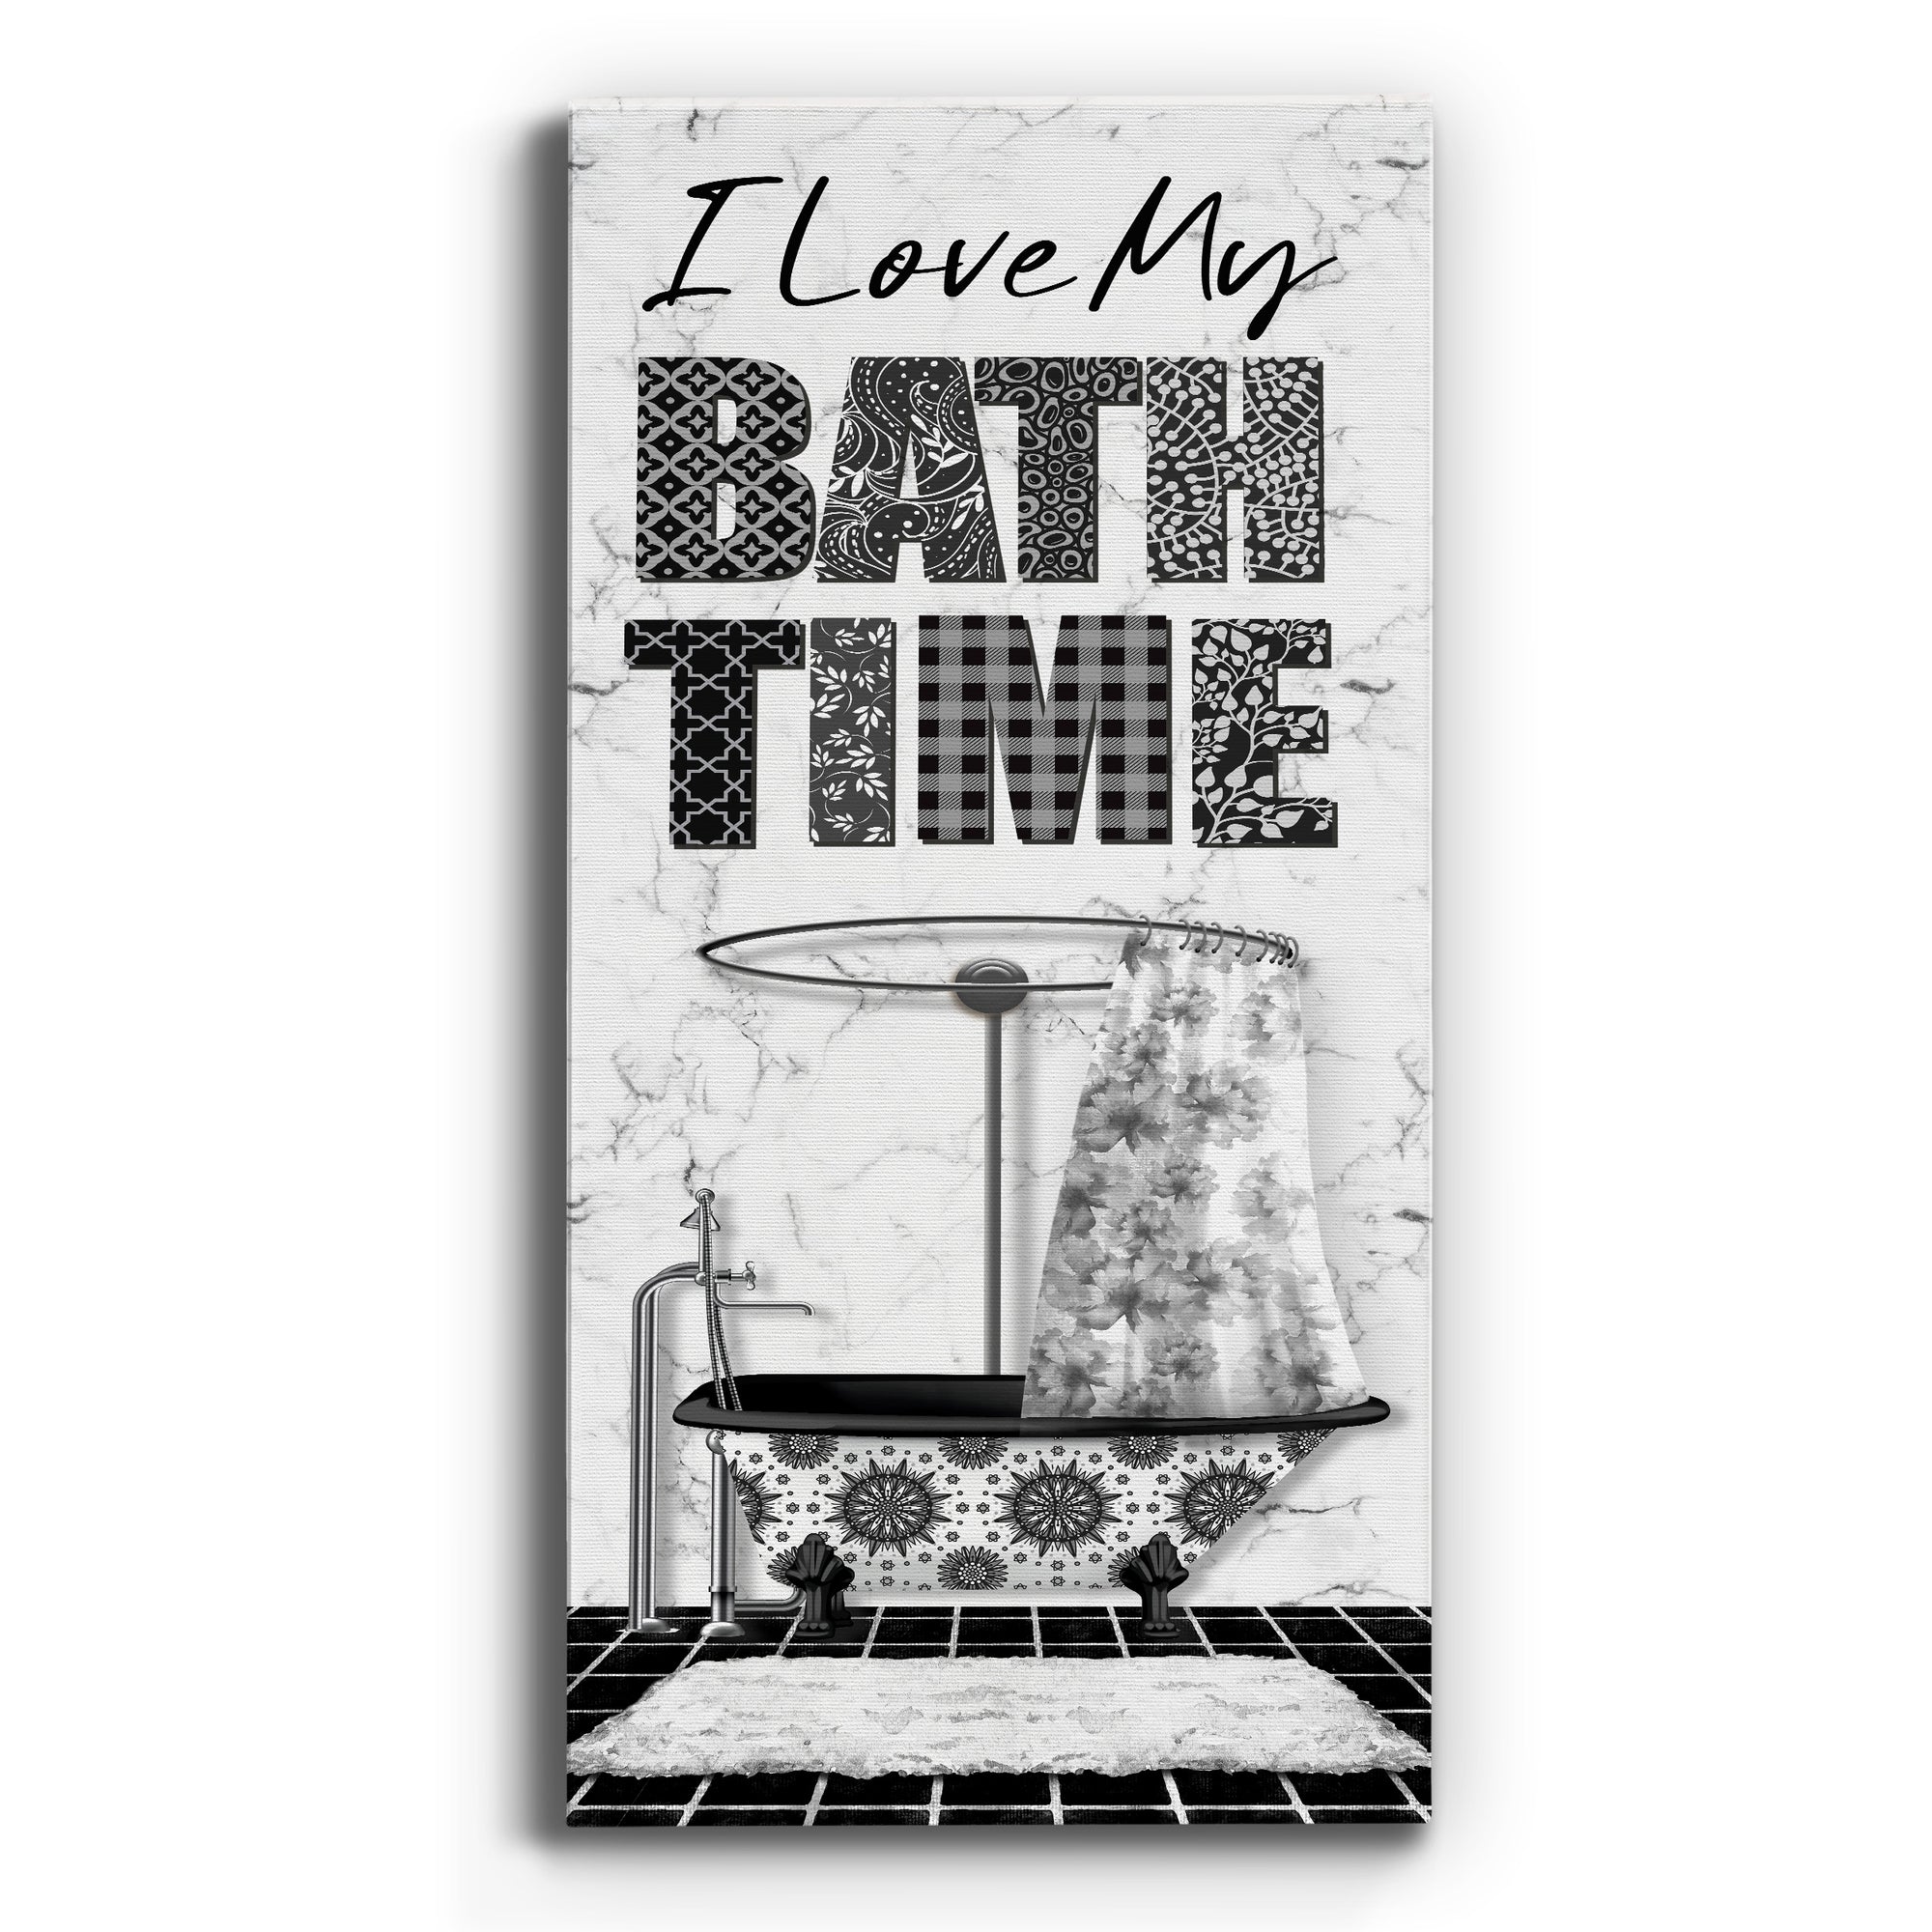 I Love My Bath Time - Premium Gallery Wrapped Canvas - Ready to Hang